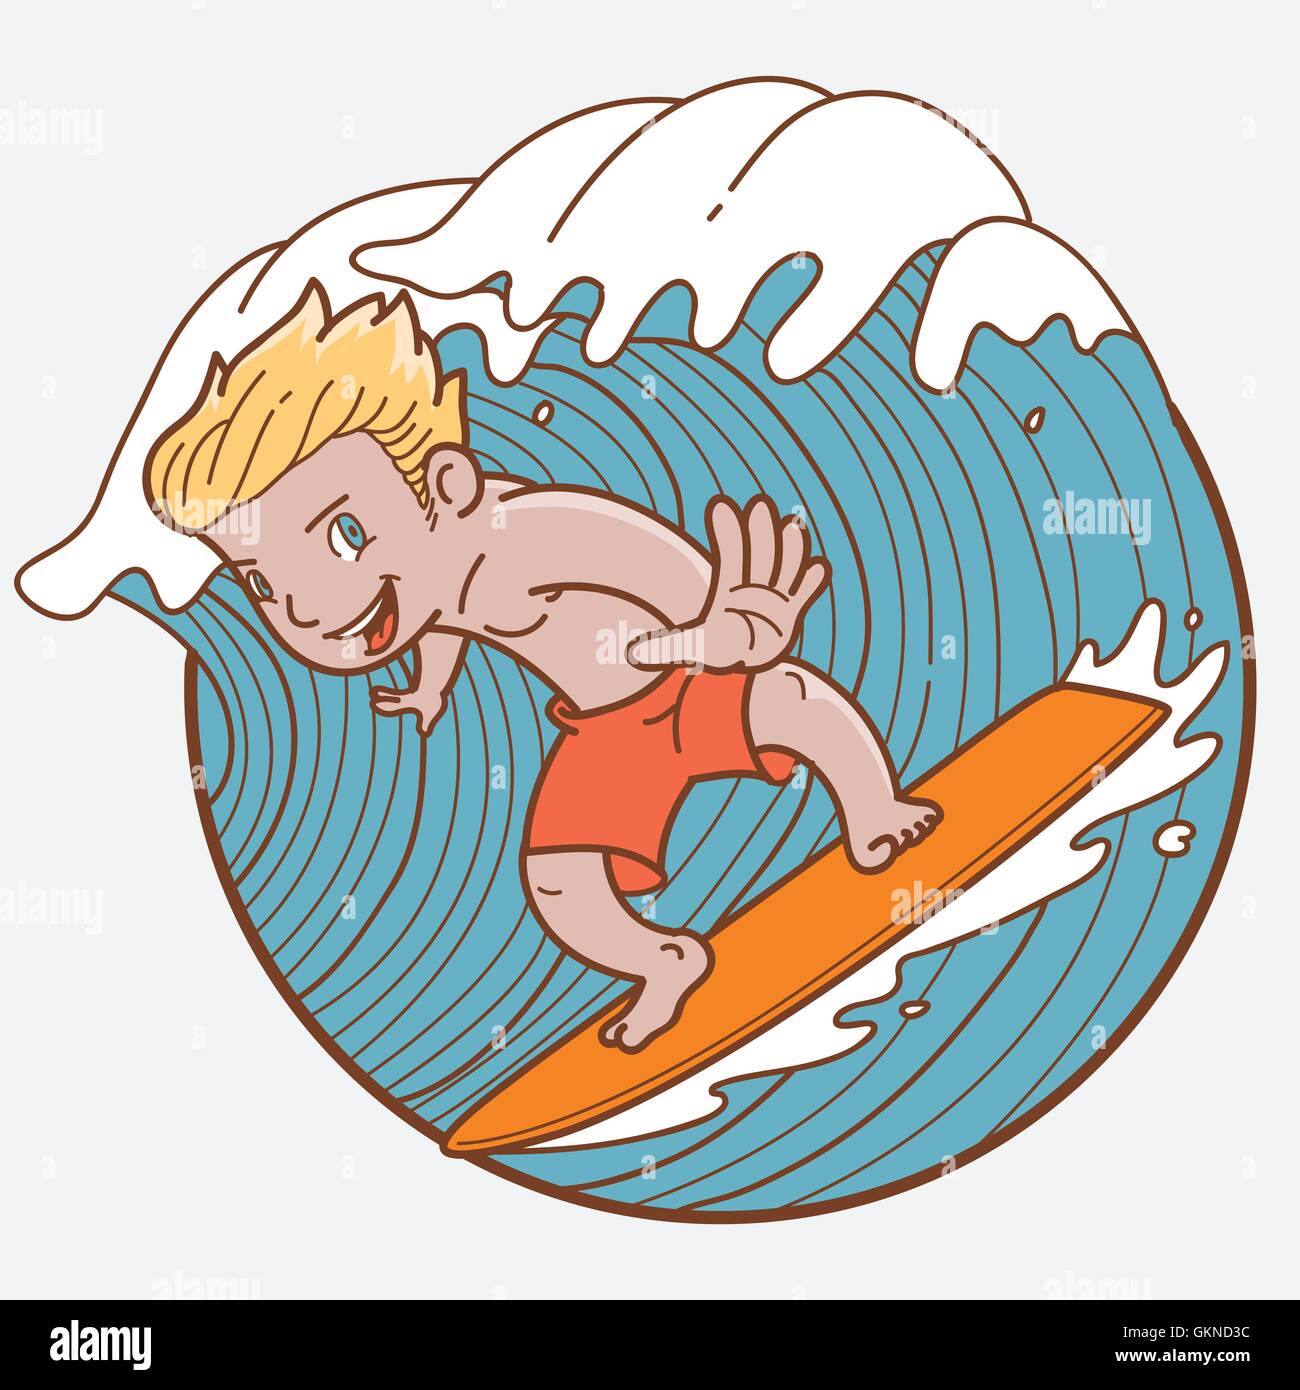 Surf's Up Dude - Surfing Themed Adult Coloring Book - Cute